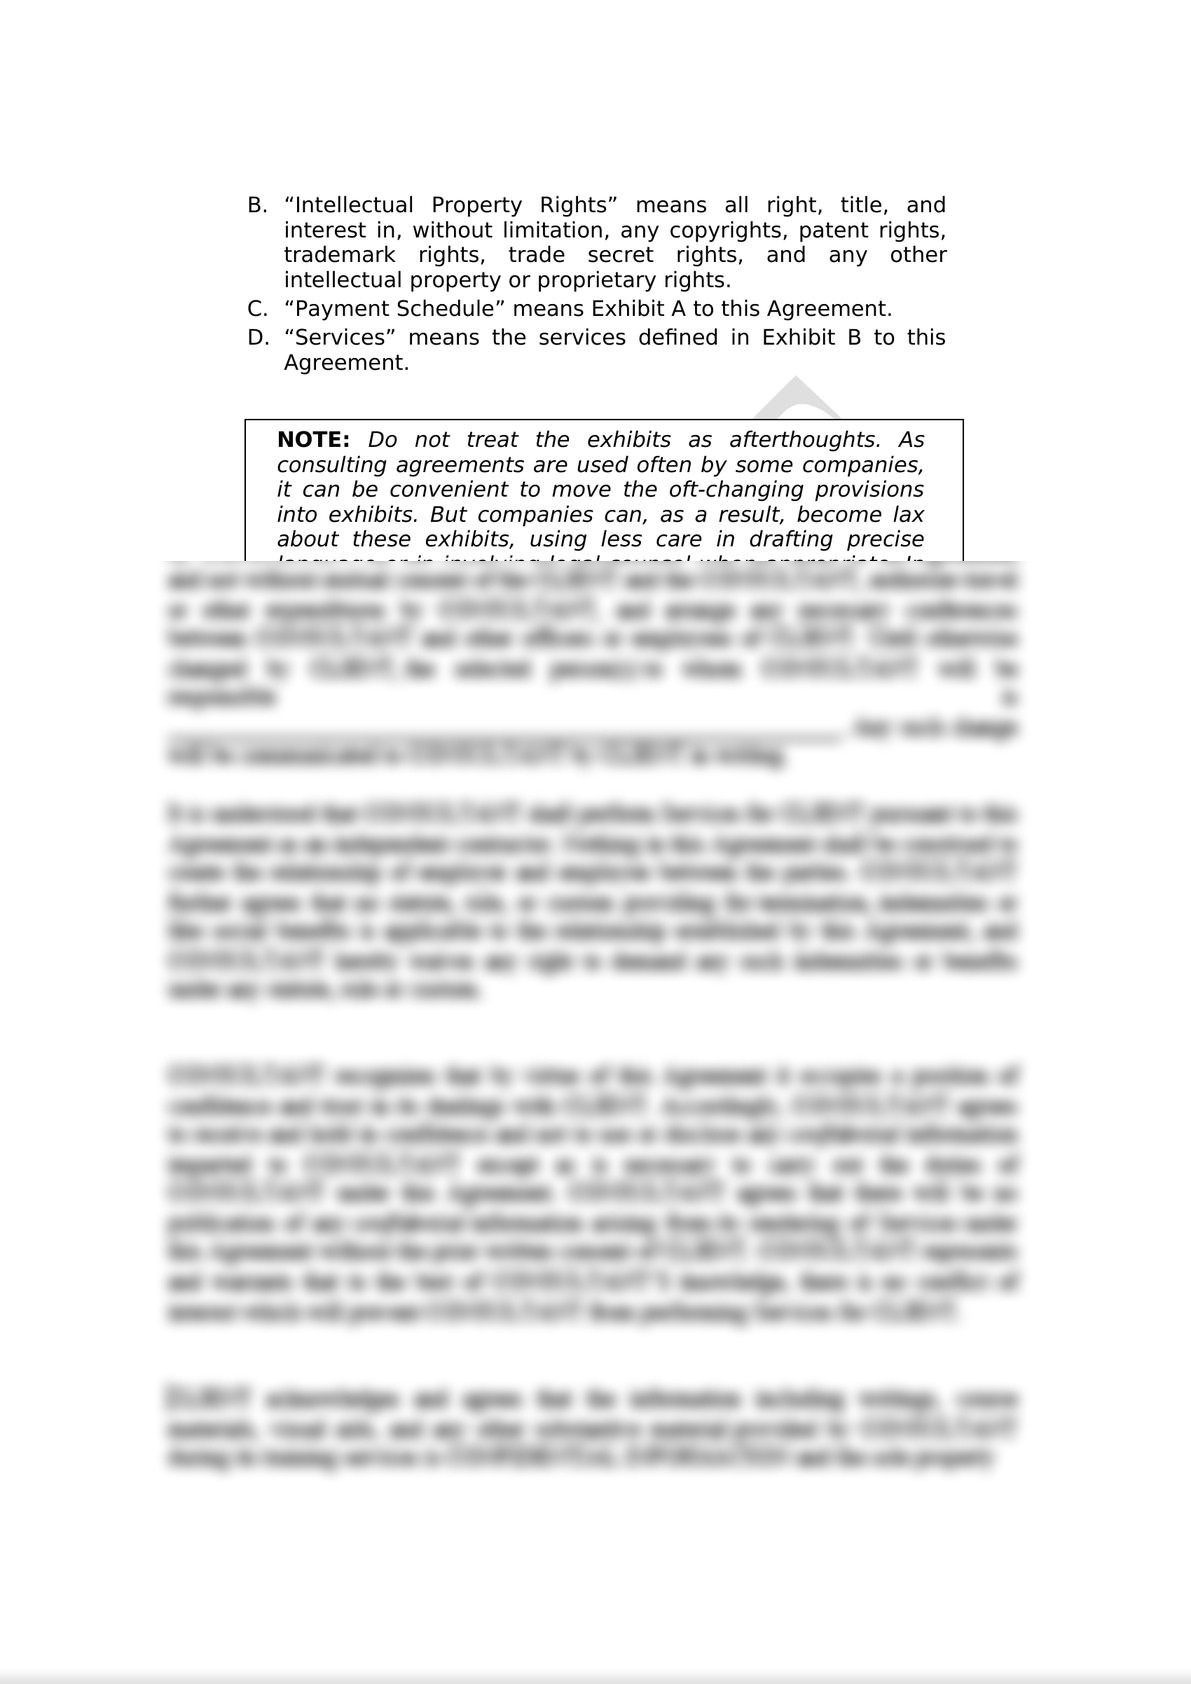 Consulting Agreement (IP Context)-1